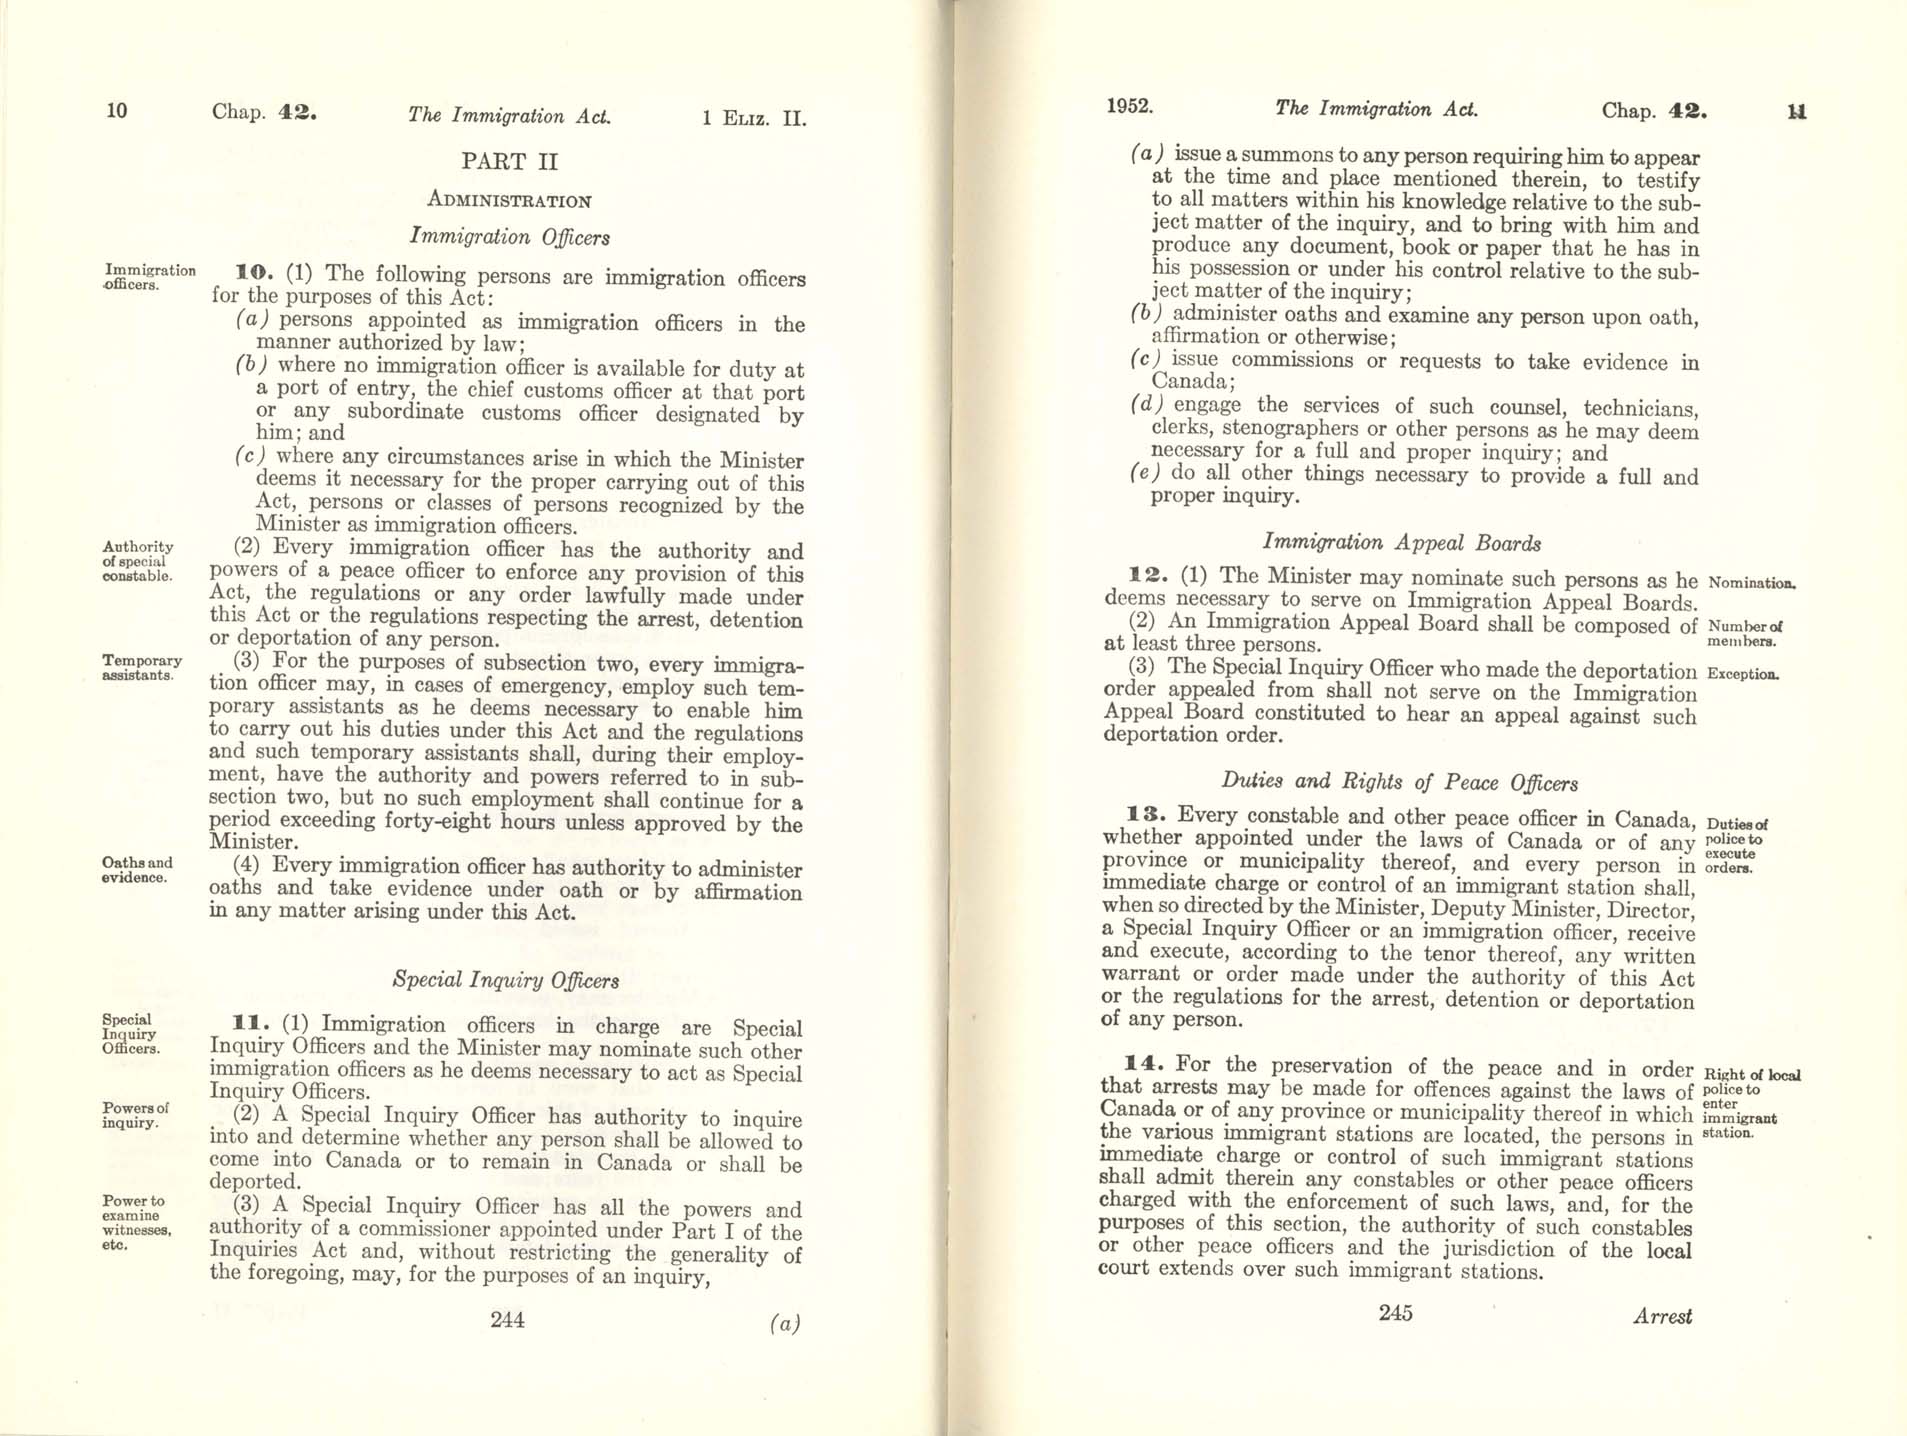 CHAP 42 Page 244, 245 Immigration Act, 1952